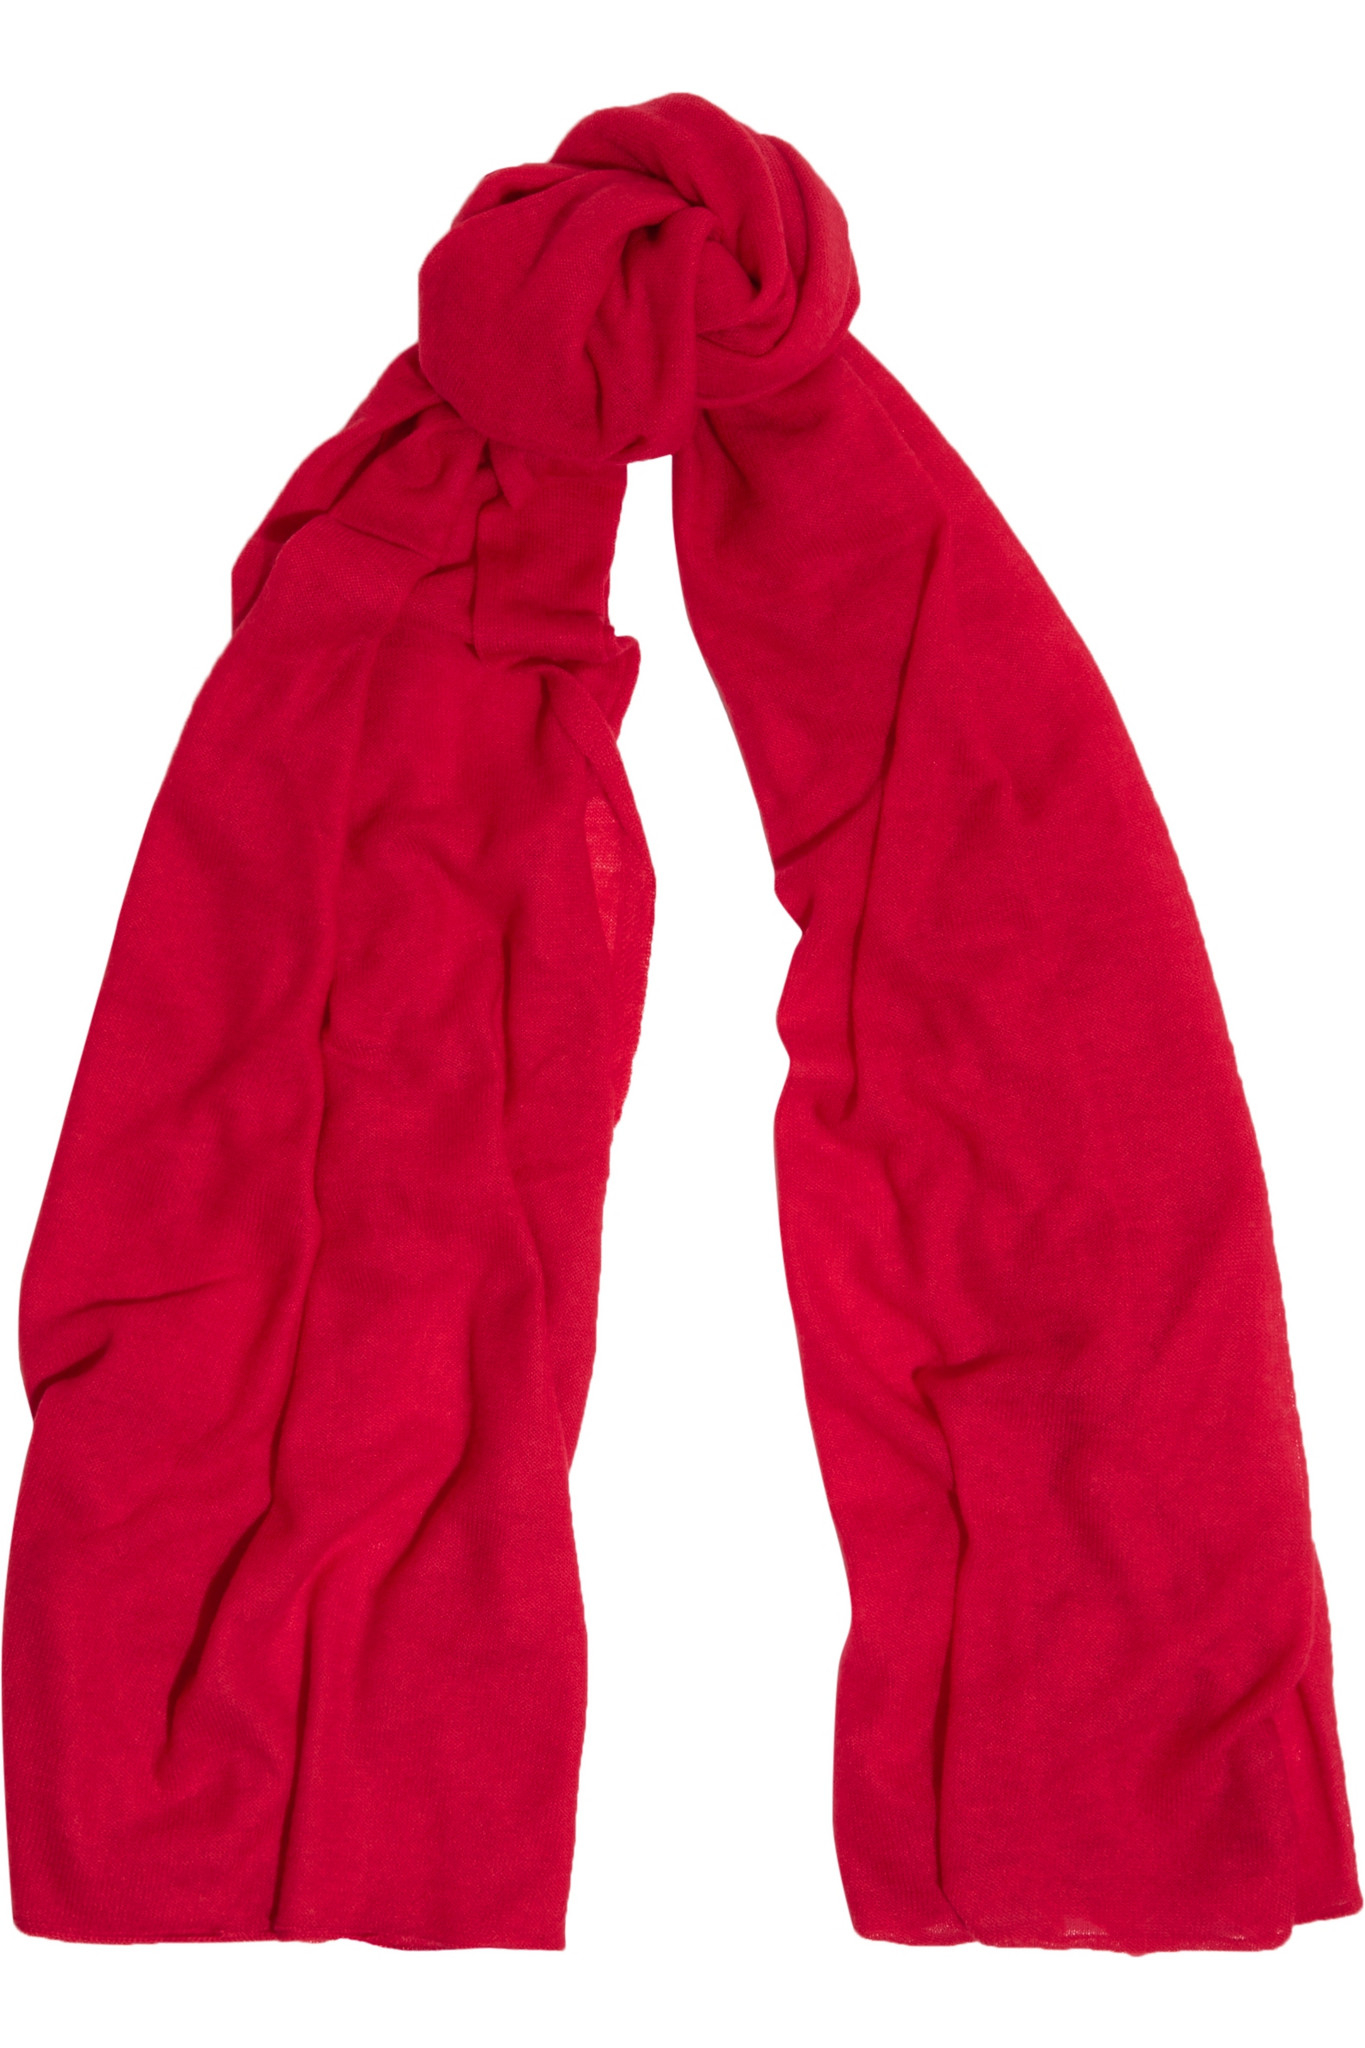 JOSEPH Cashmere Scarf in Red - Lyst